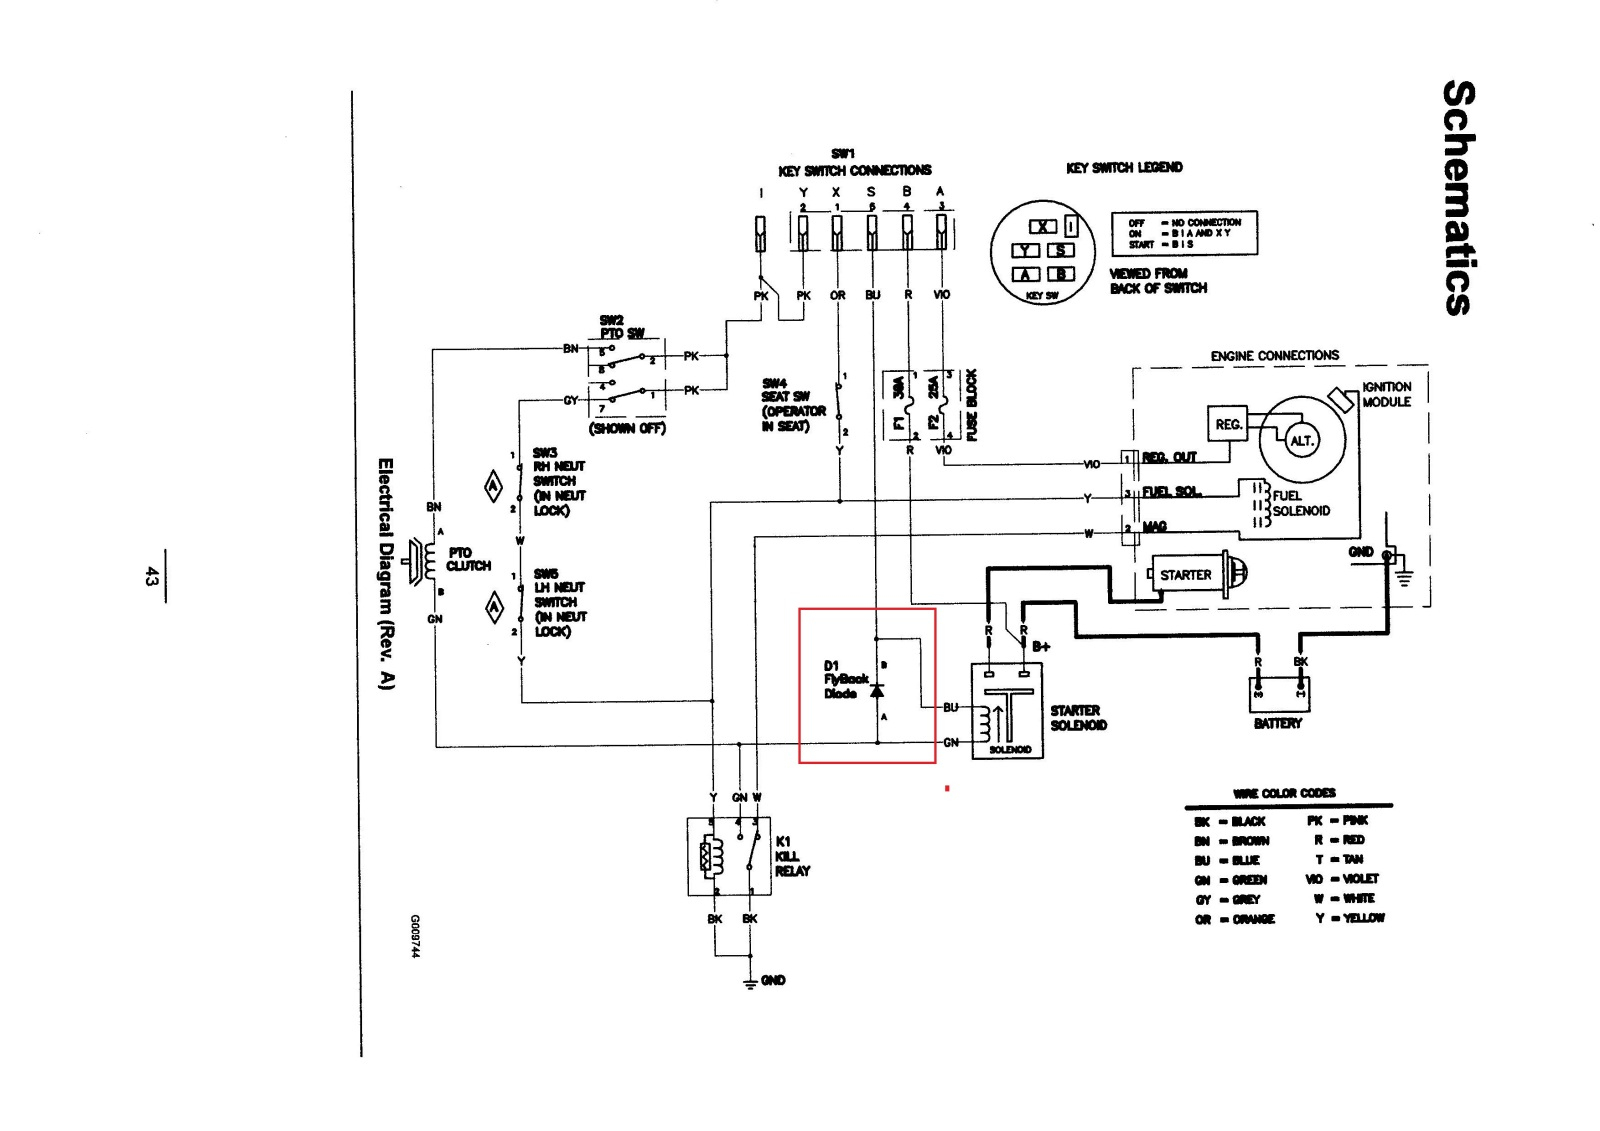 5610 Ford Tractor Wiring Diagram - Wiring Diagram Data Oreo - Ford Tractor Ignition Switch Wiring Diagram